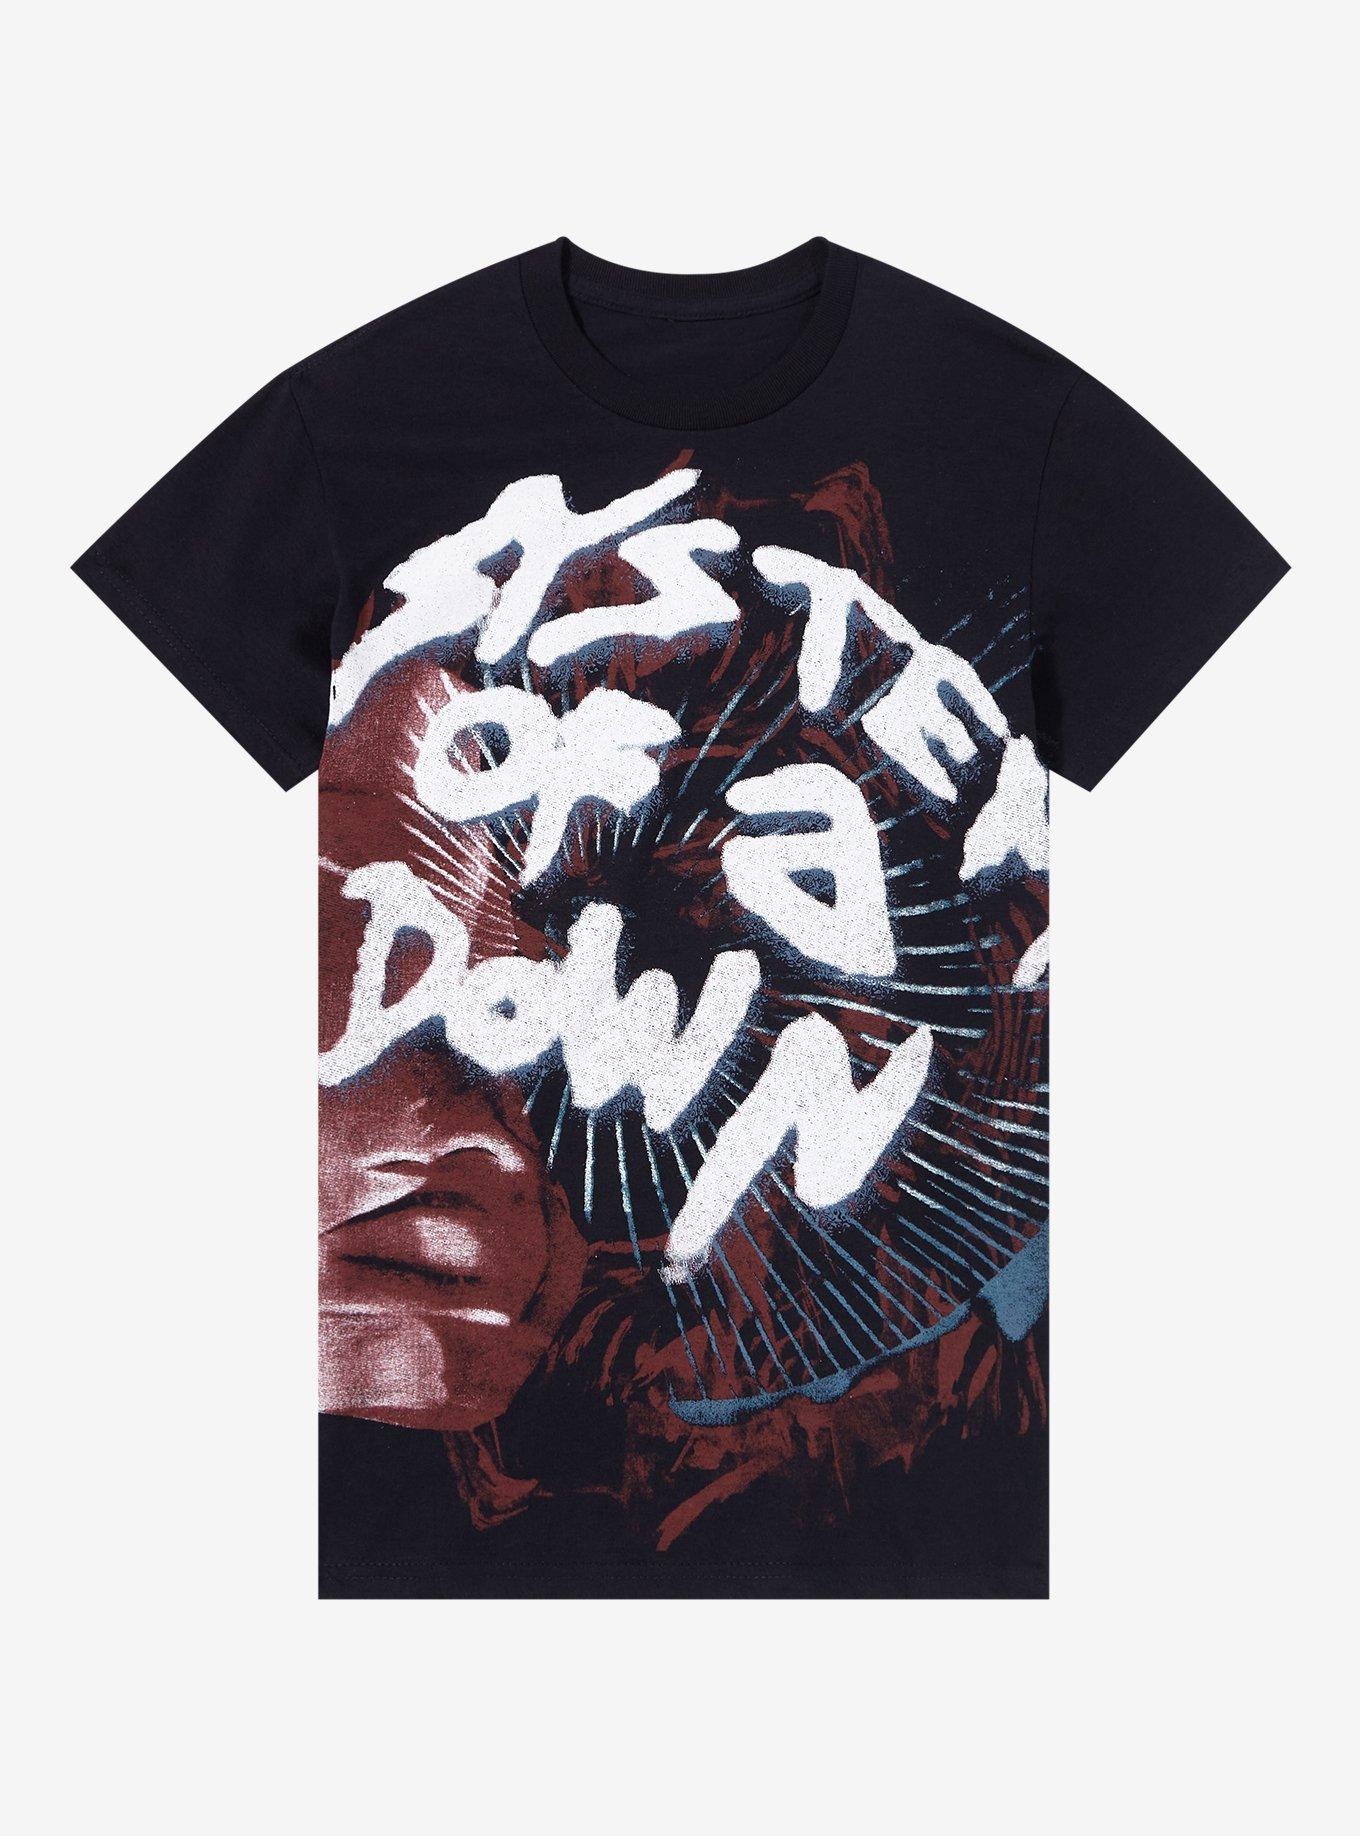 System Of A Down Jumbo Graphic Boyfriend Fit Girls T-Shirt